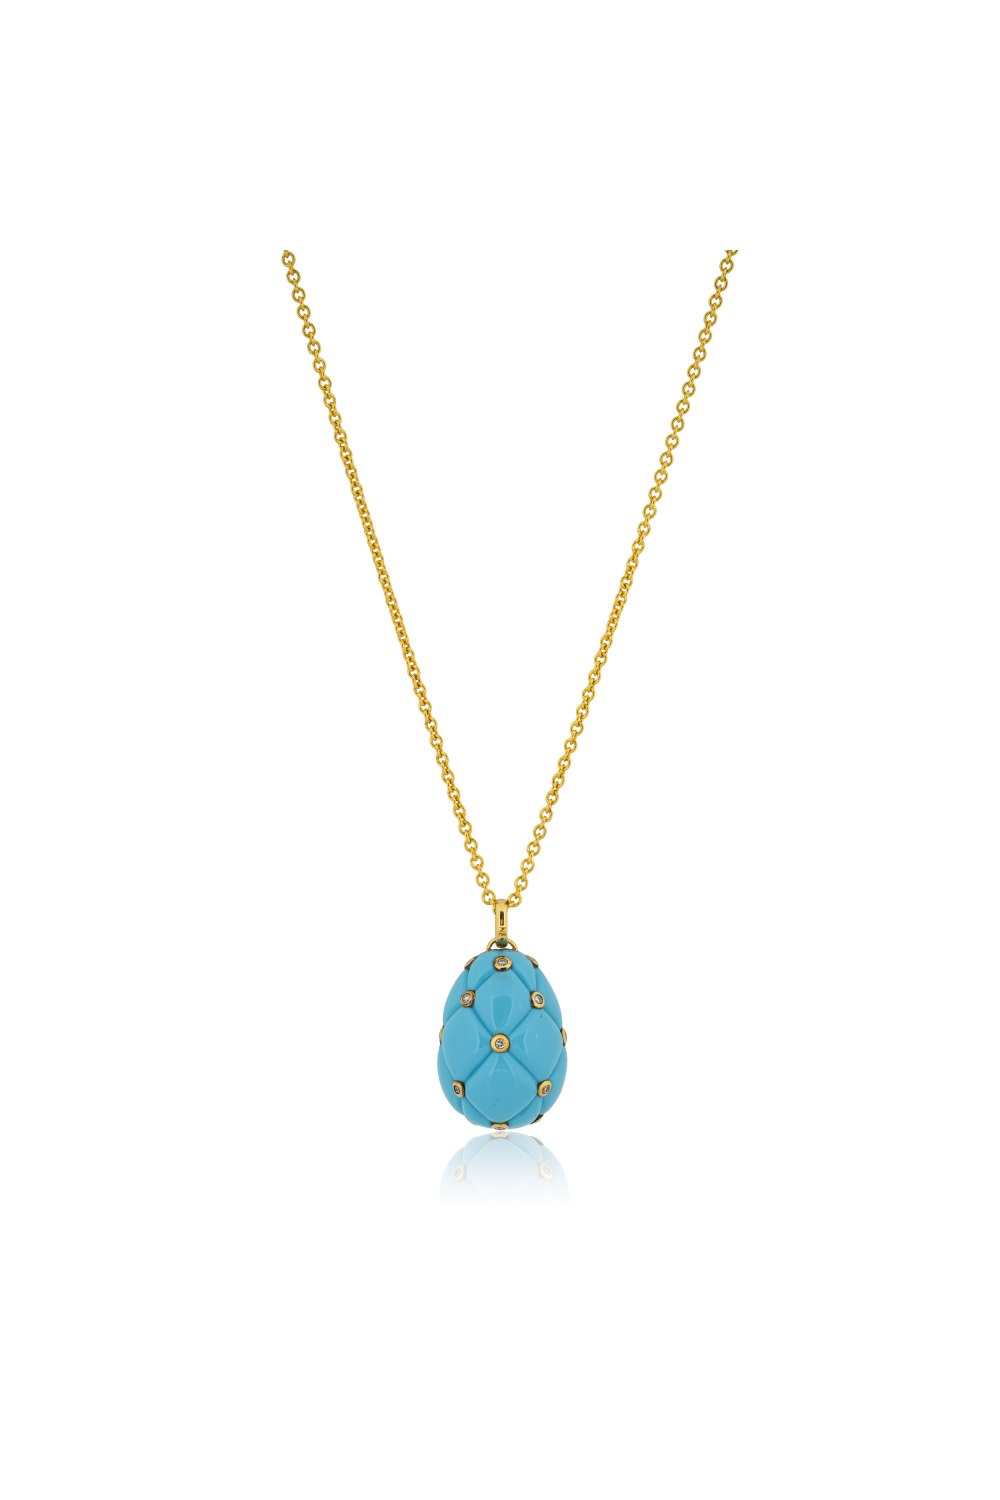 Shimmering Diamond Droplets Turquoise Egg Pendant Necklace